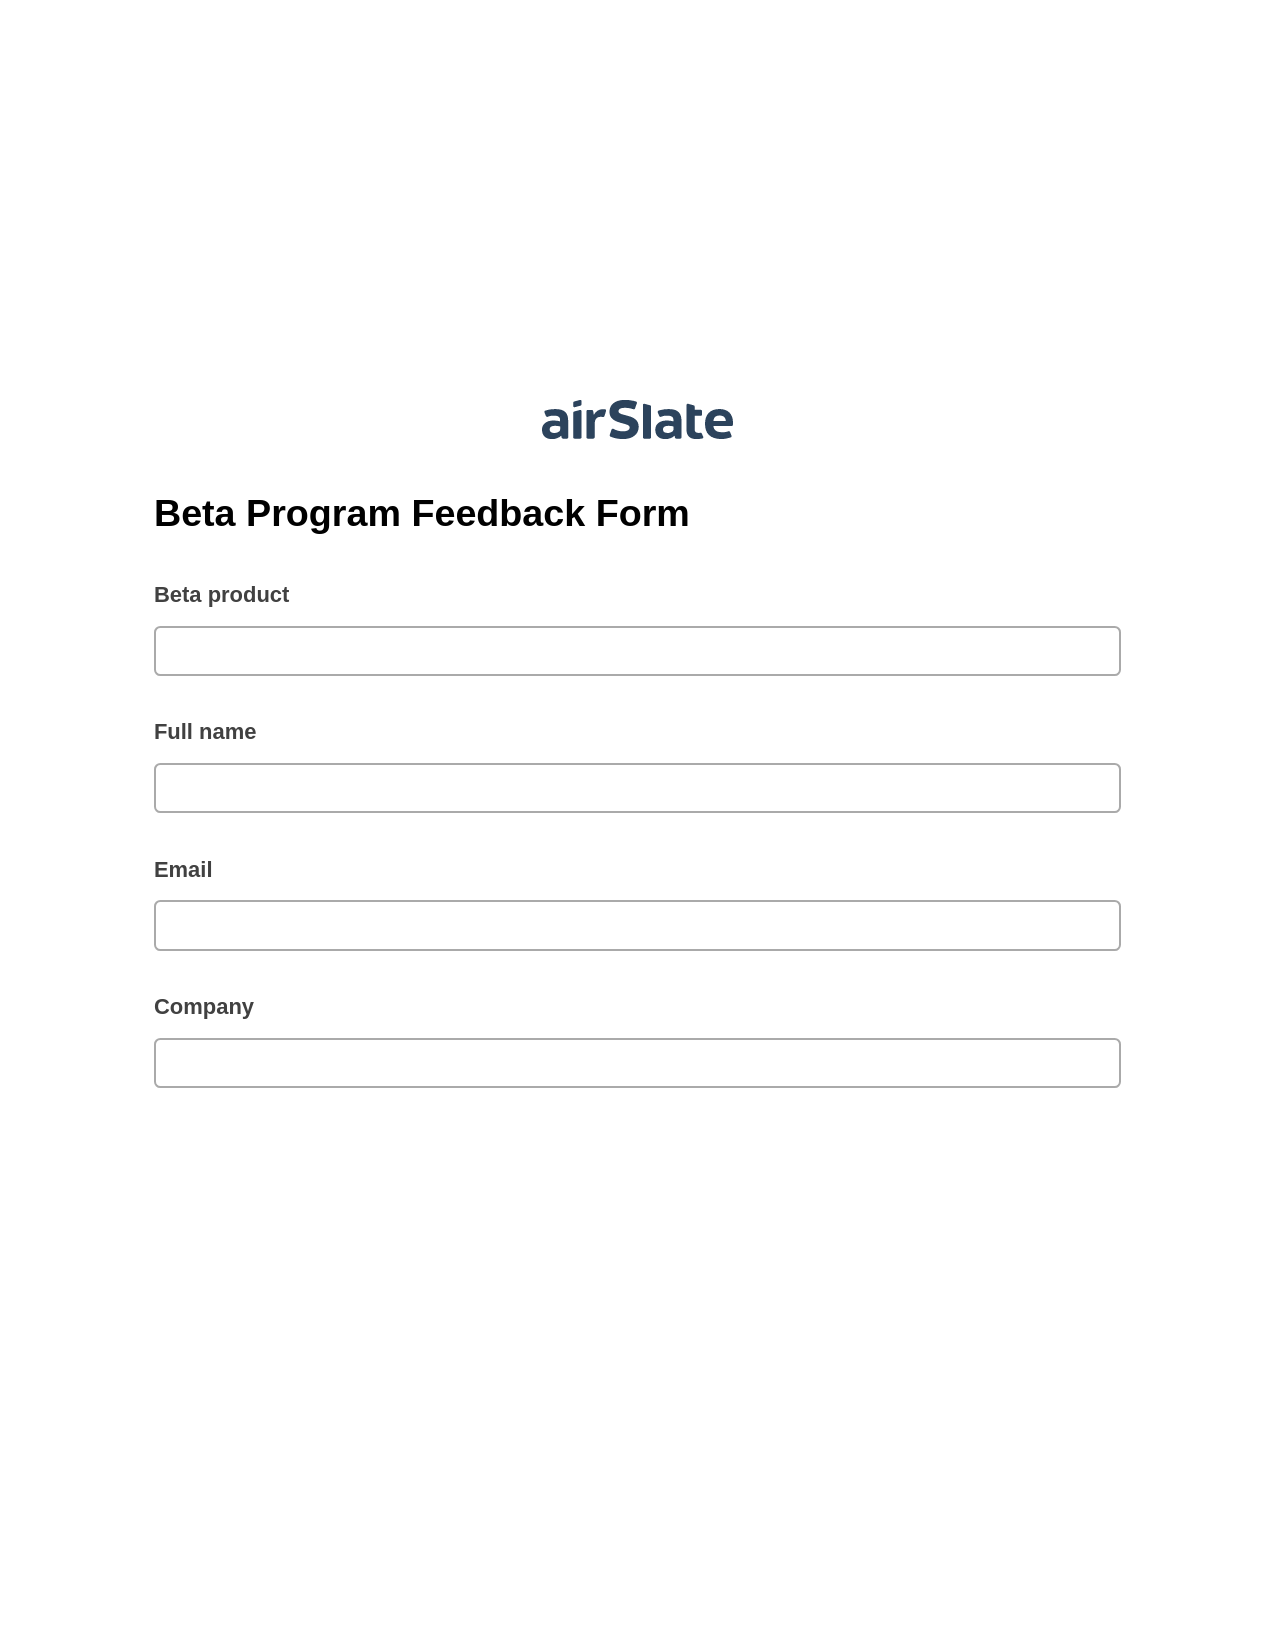 Beta Program Feedback Form Pre-fill from NetSuite Records Bot, Email Notification Bot, Export to Excel 365 Bot